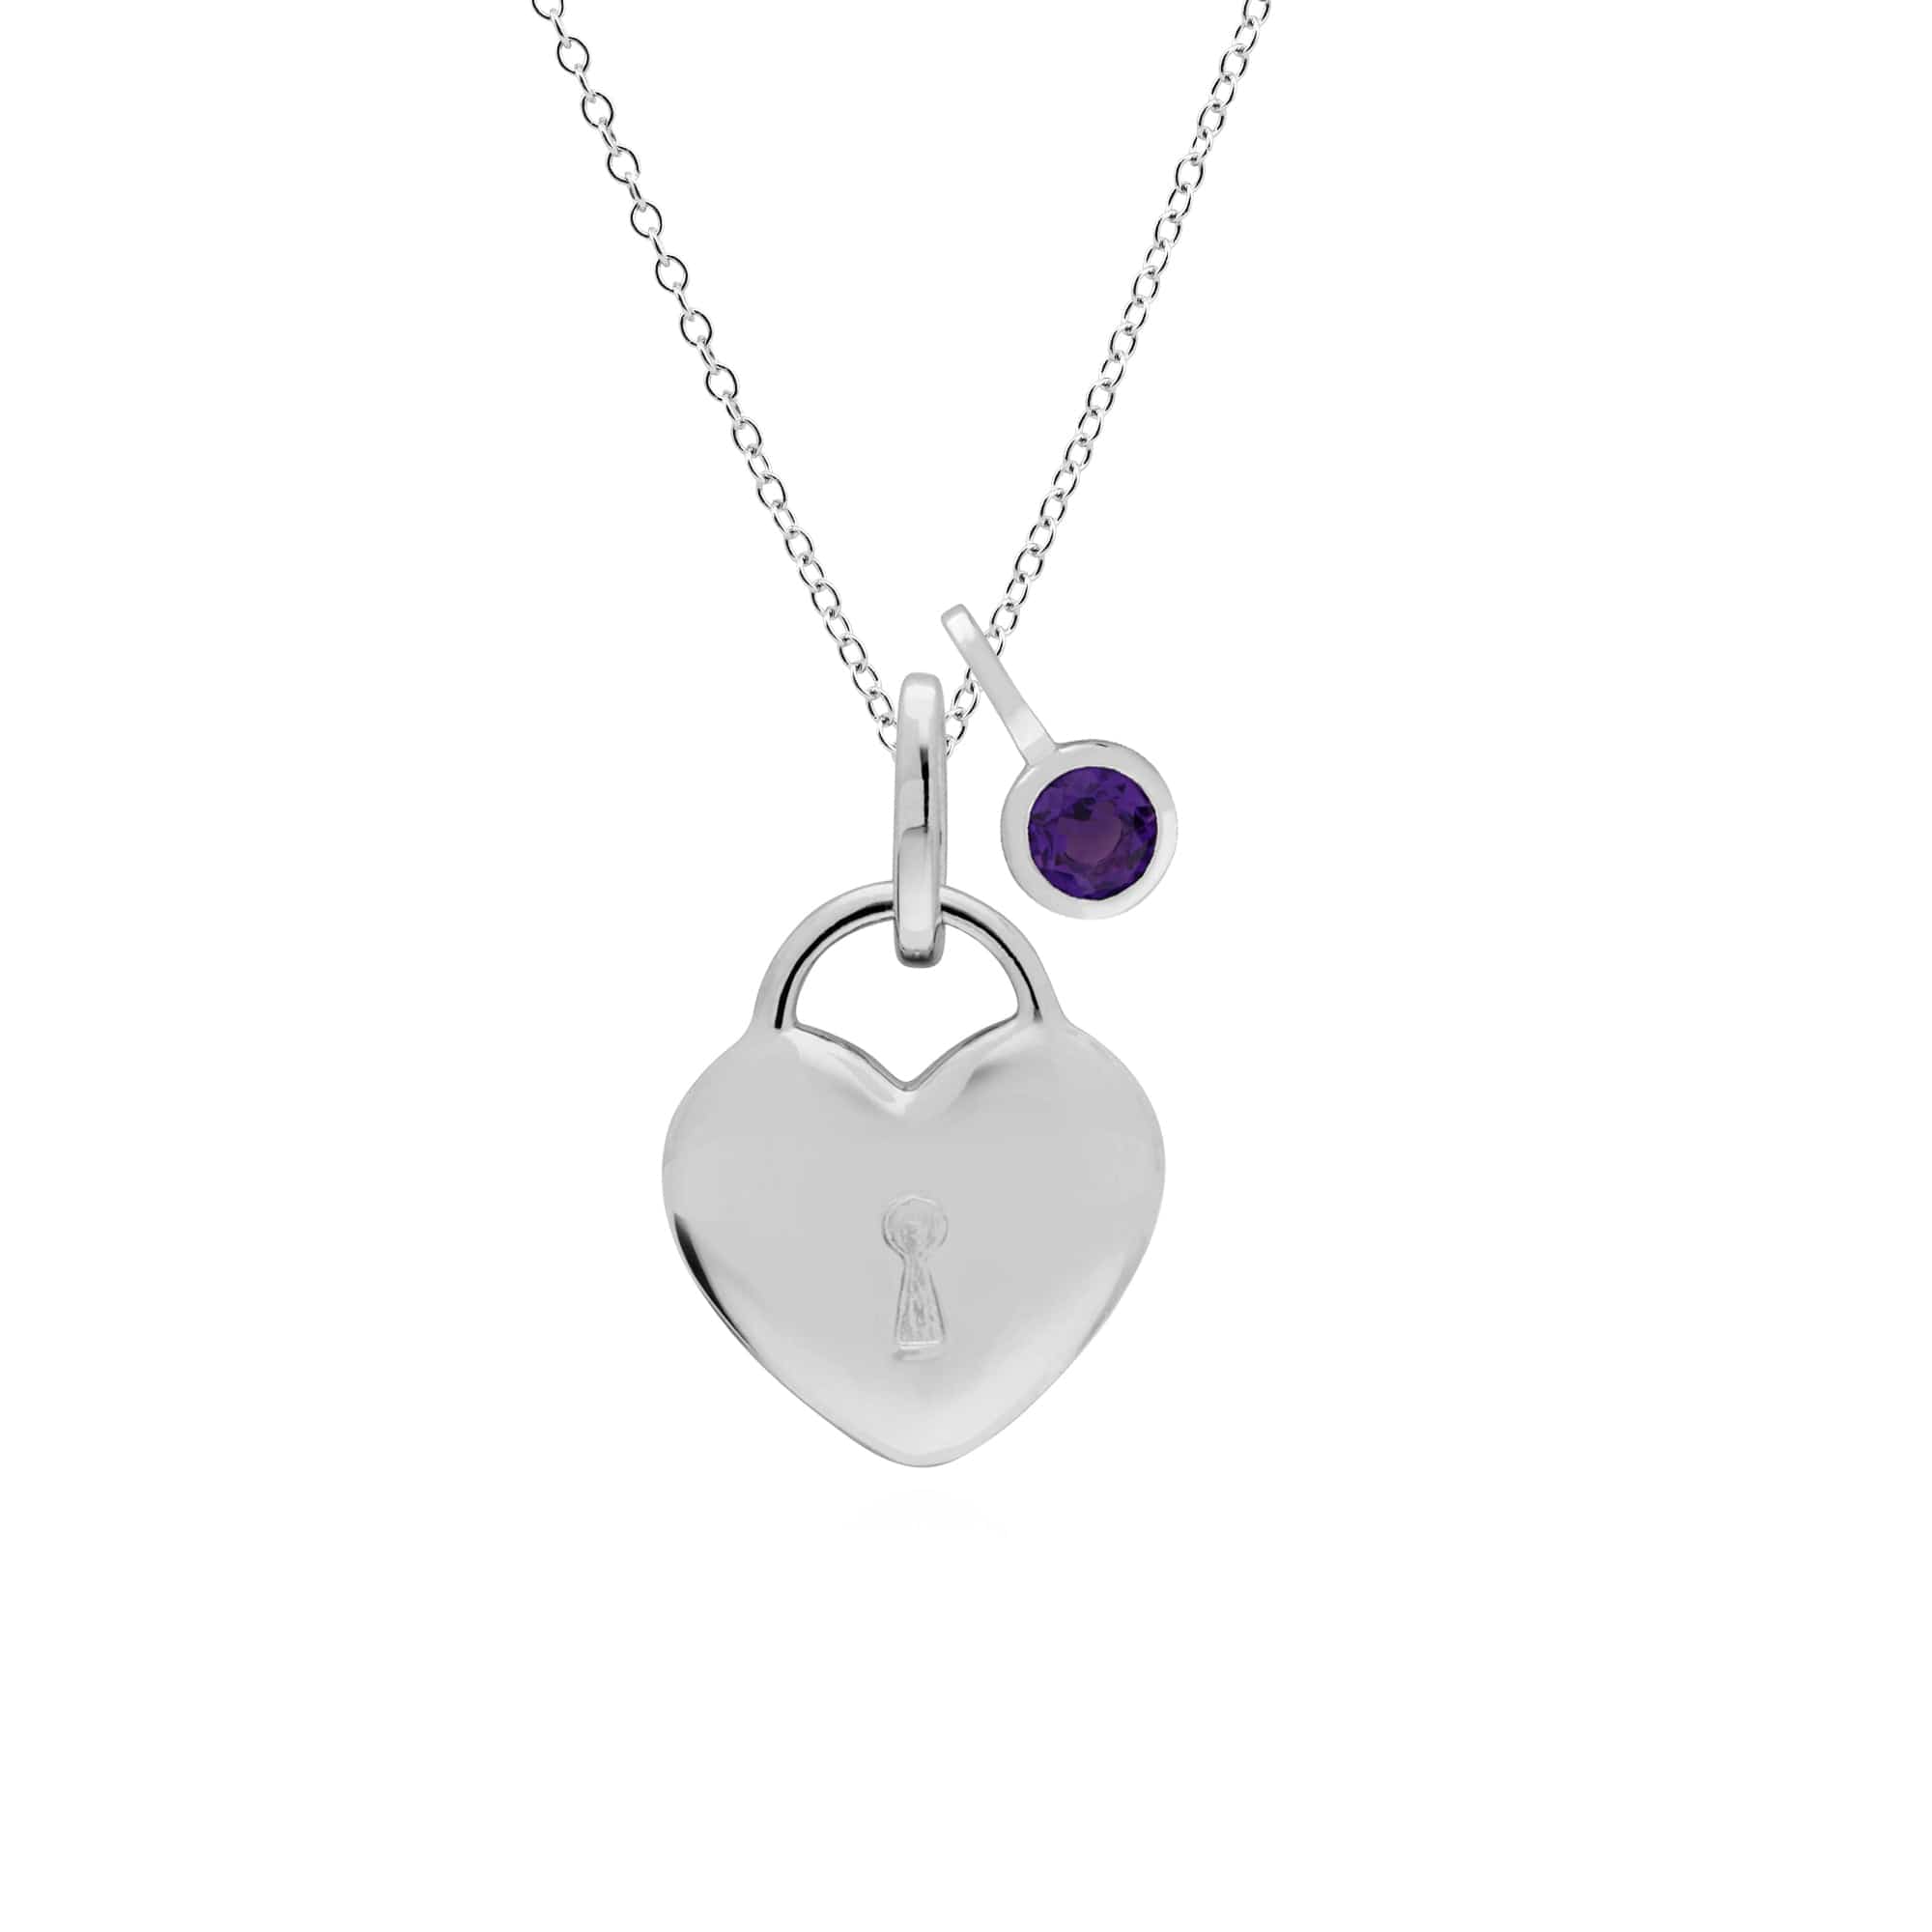 270P027603925-270P027001925 Classic Heart Lock Pendant & Amethyst Charm in 925 Sterling Silver 1